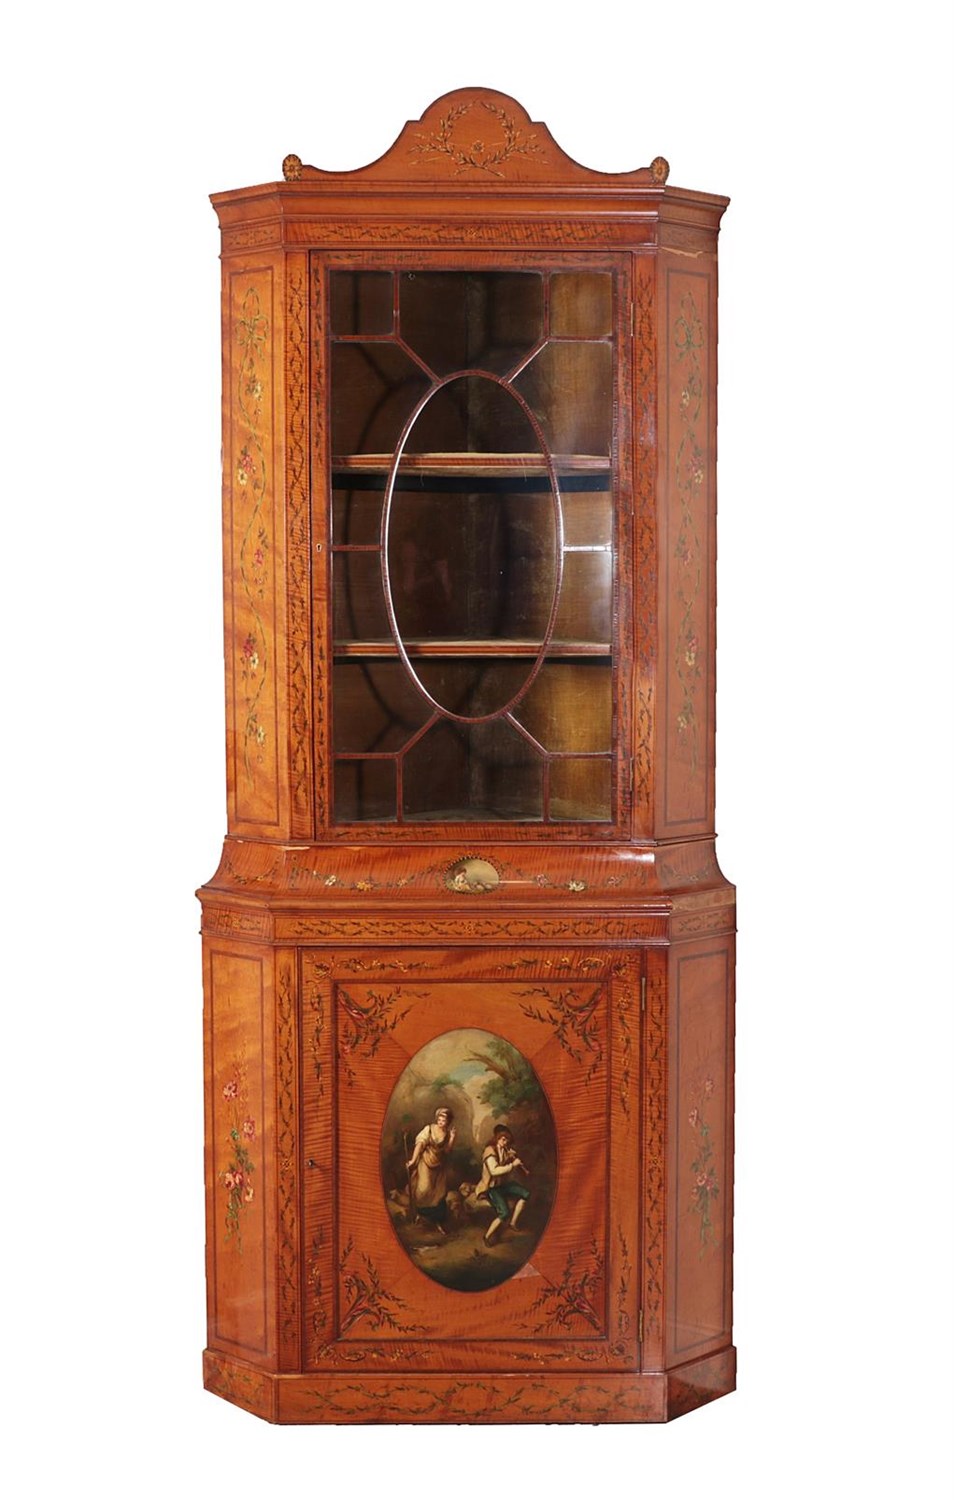 Lot 601 - A Good Satinwood and Polychrome Decorated Free-Standing Corner Cabinet, circa 1900, painted...